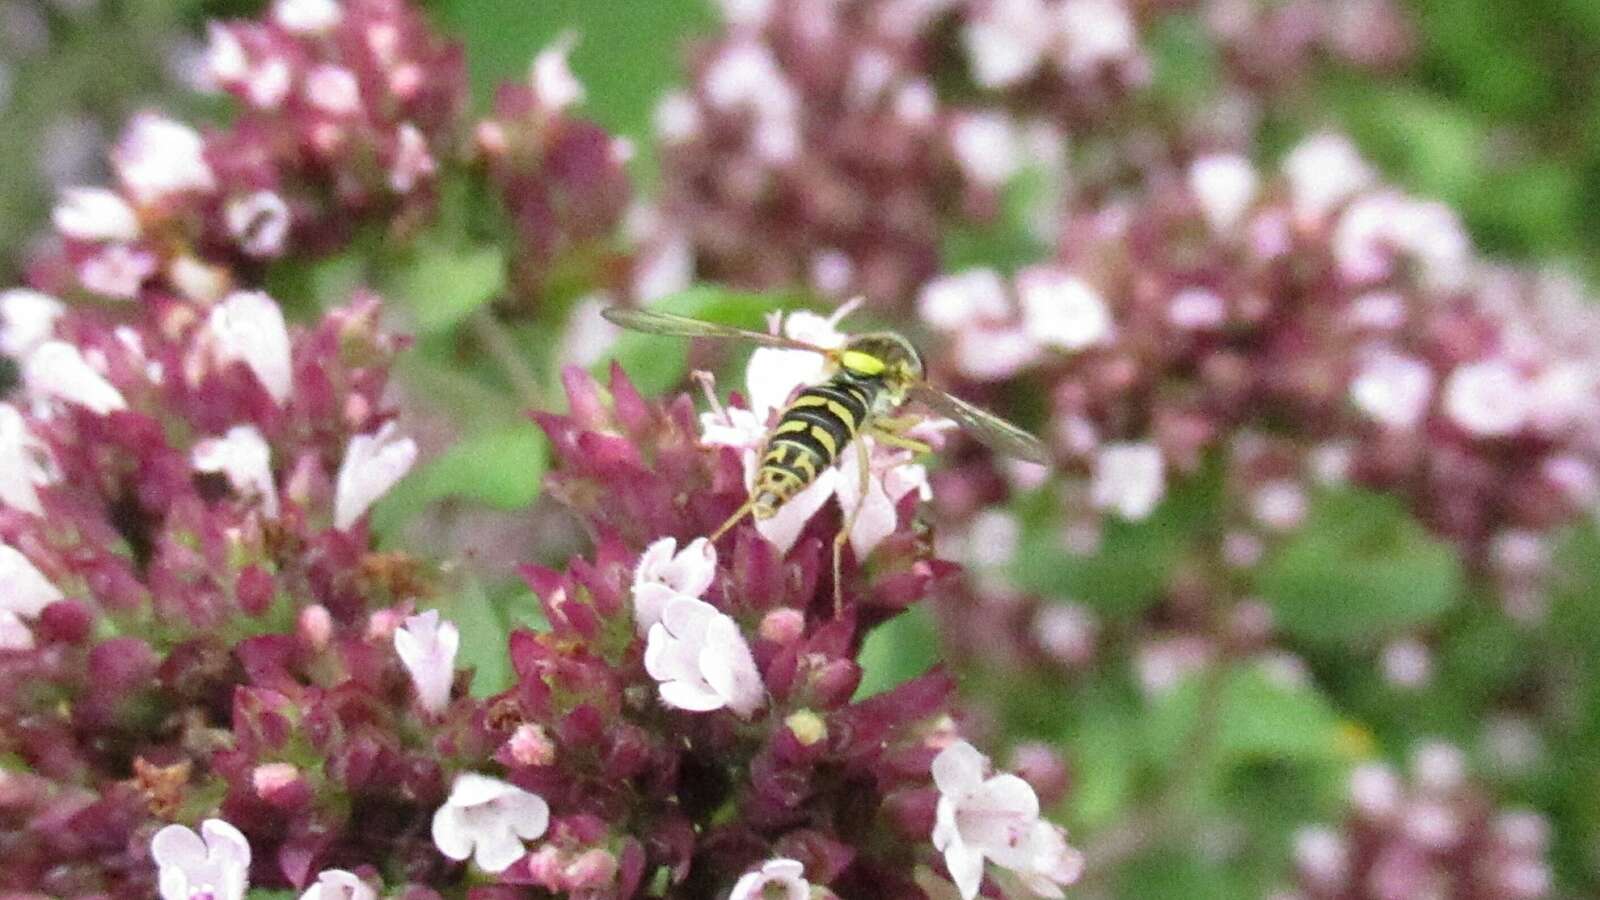 a flowering marjoram herb plant, with a hoverfly on it's flowers.